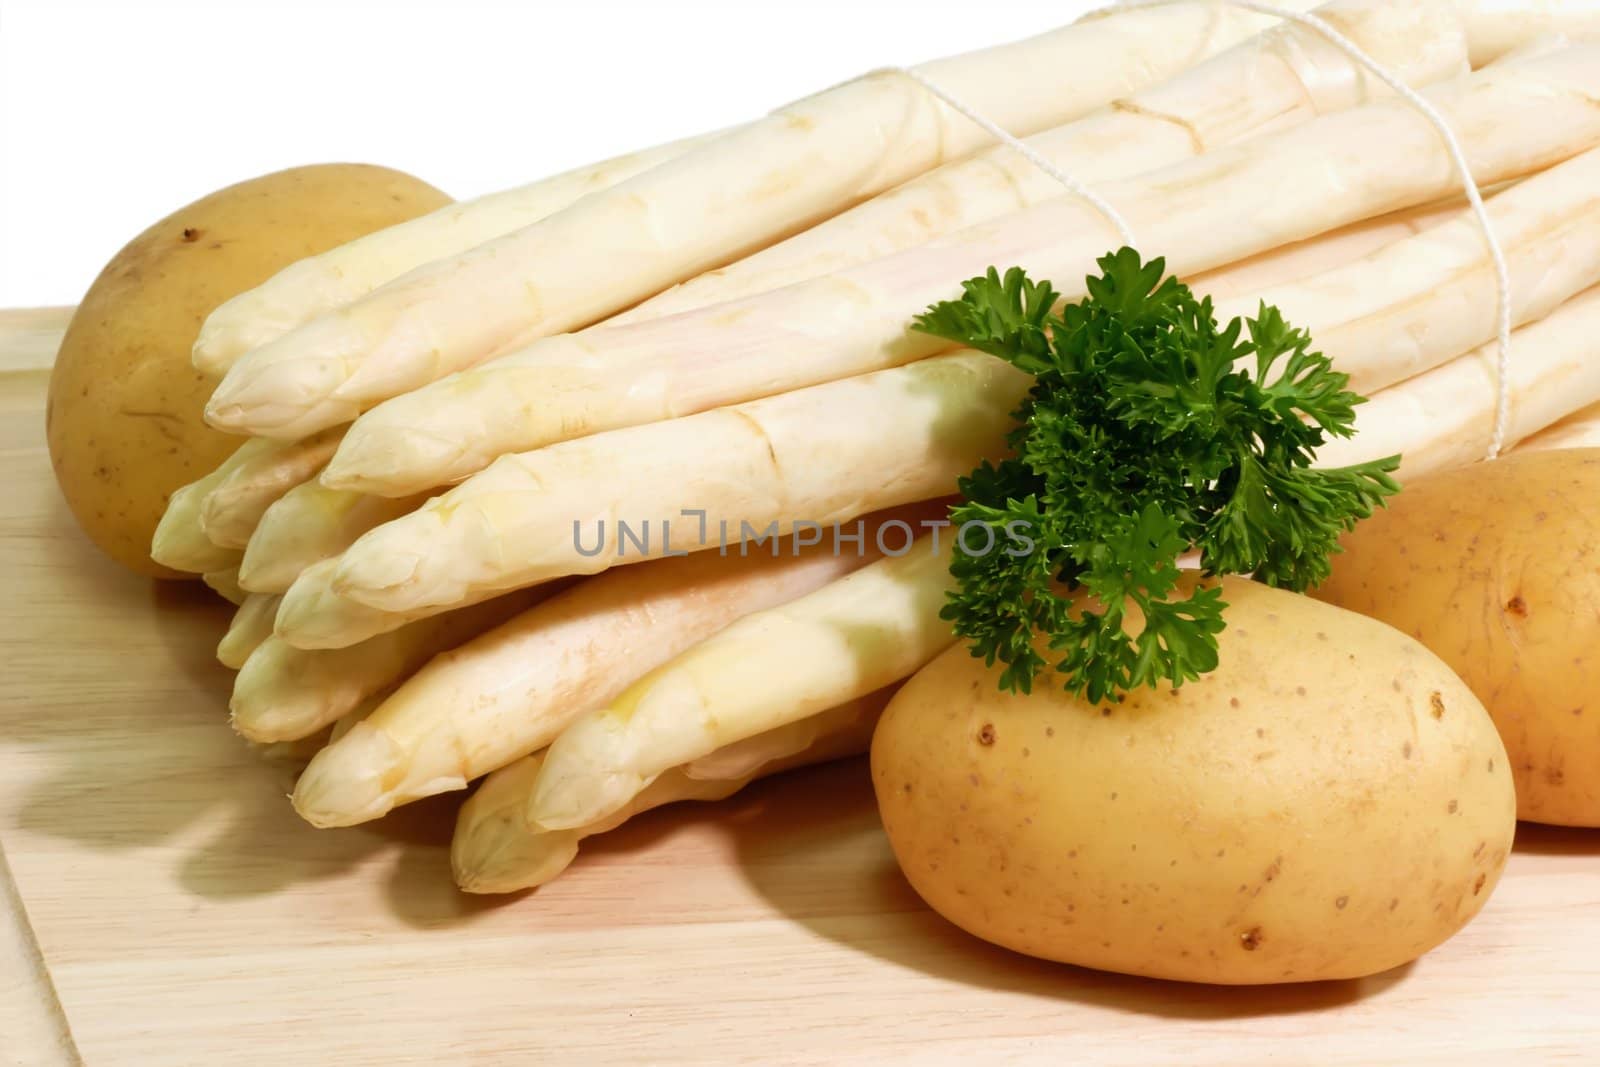 Fresg asparagus with potatoes on a kitchen board